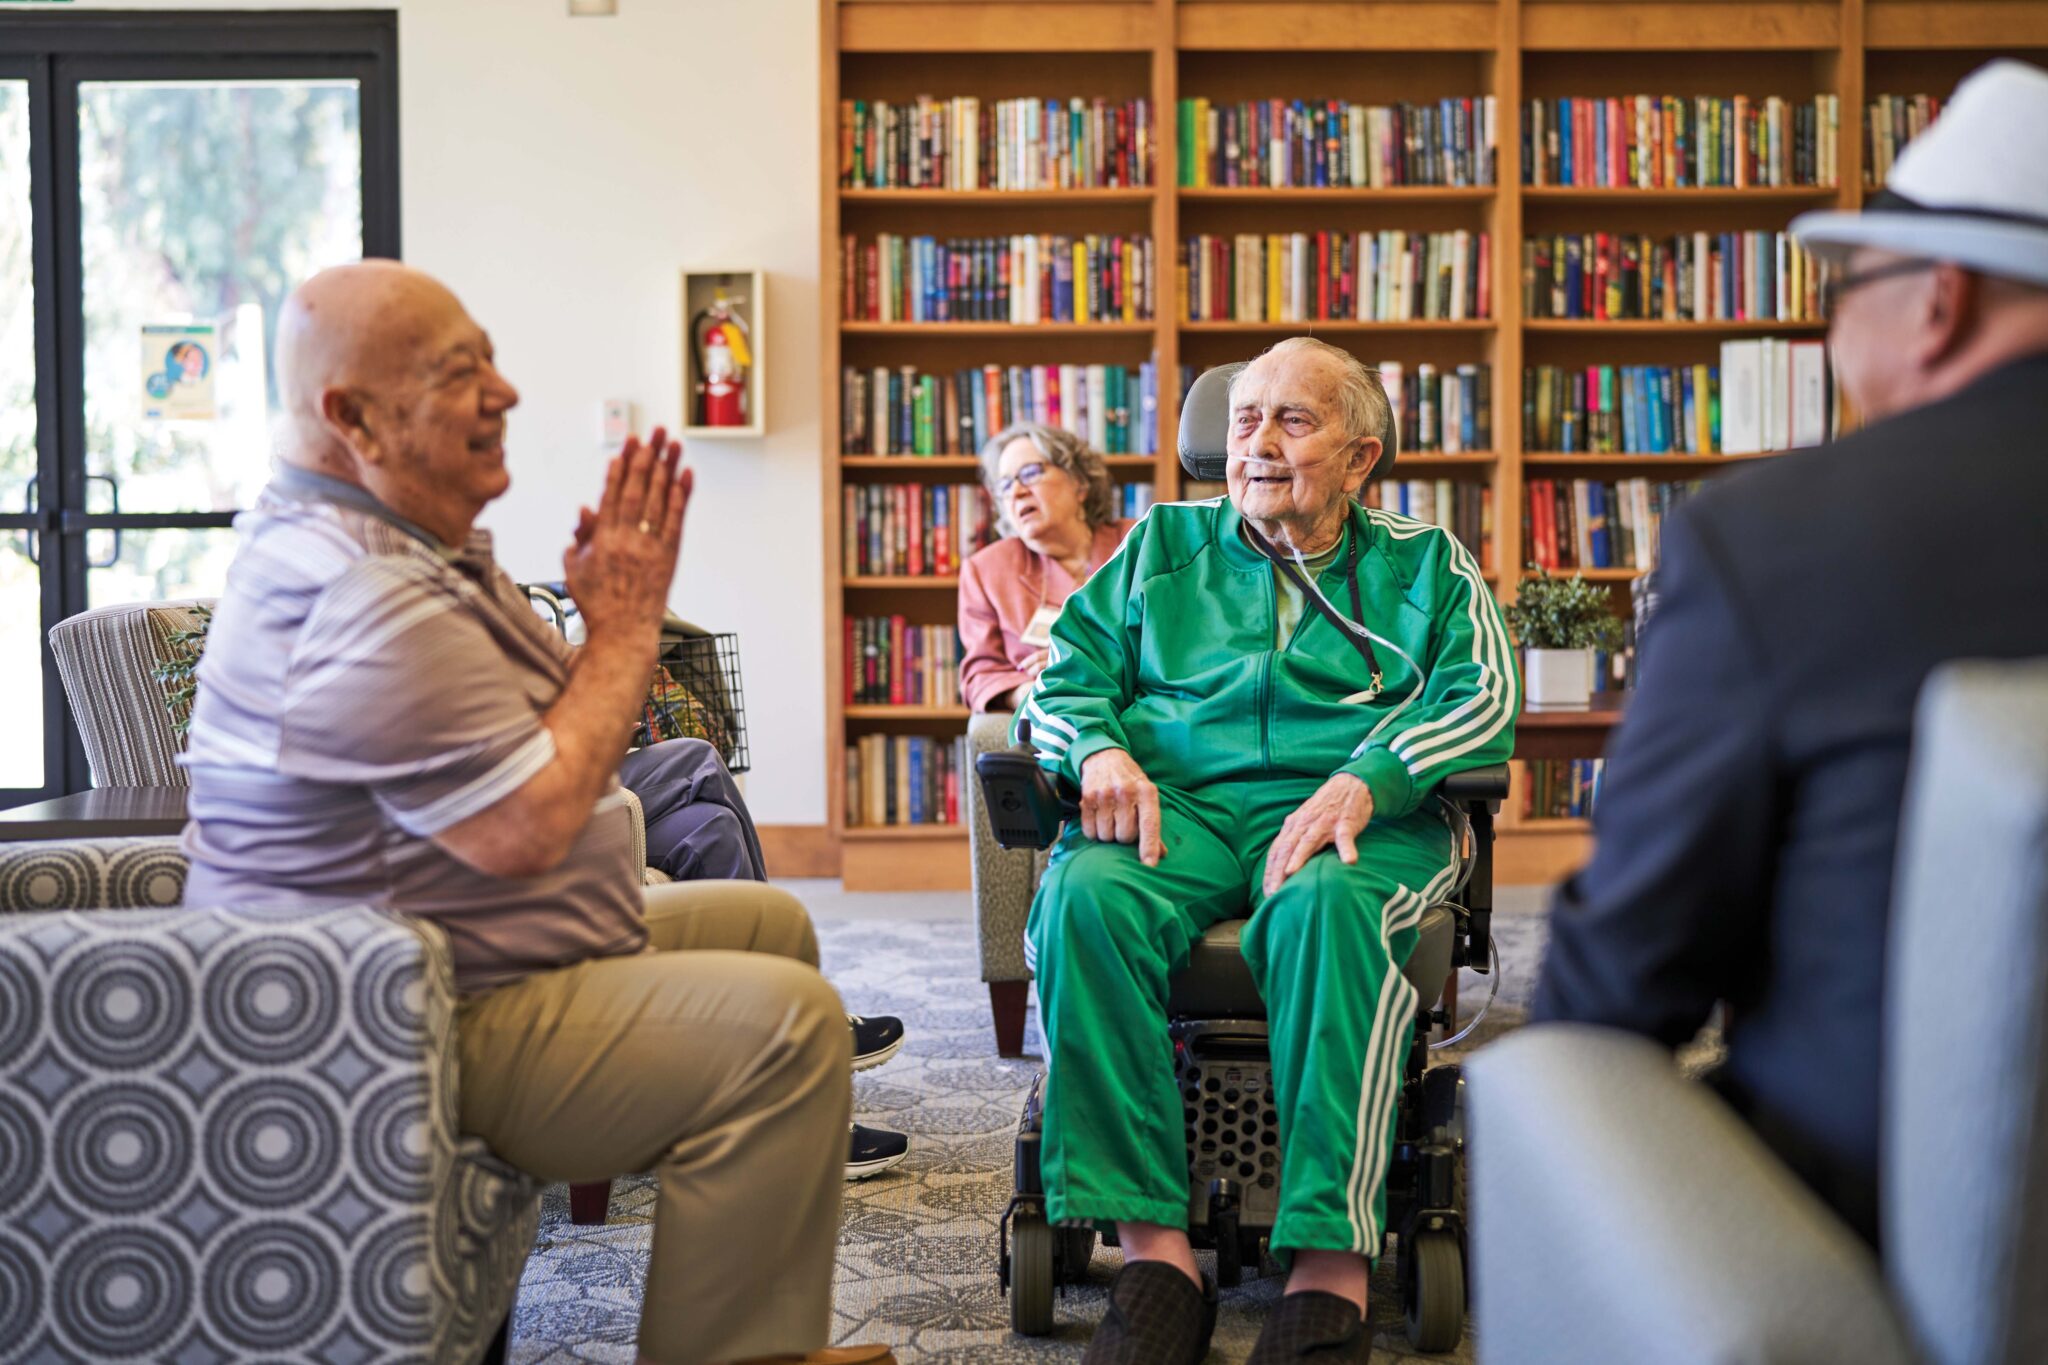 Masonic Homes residents gather in the library of the Covina retirement community.